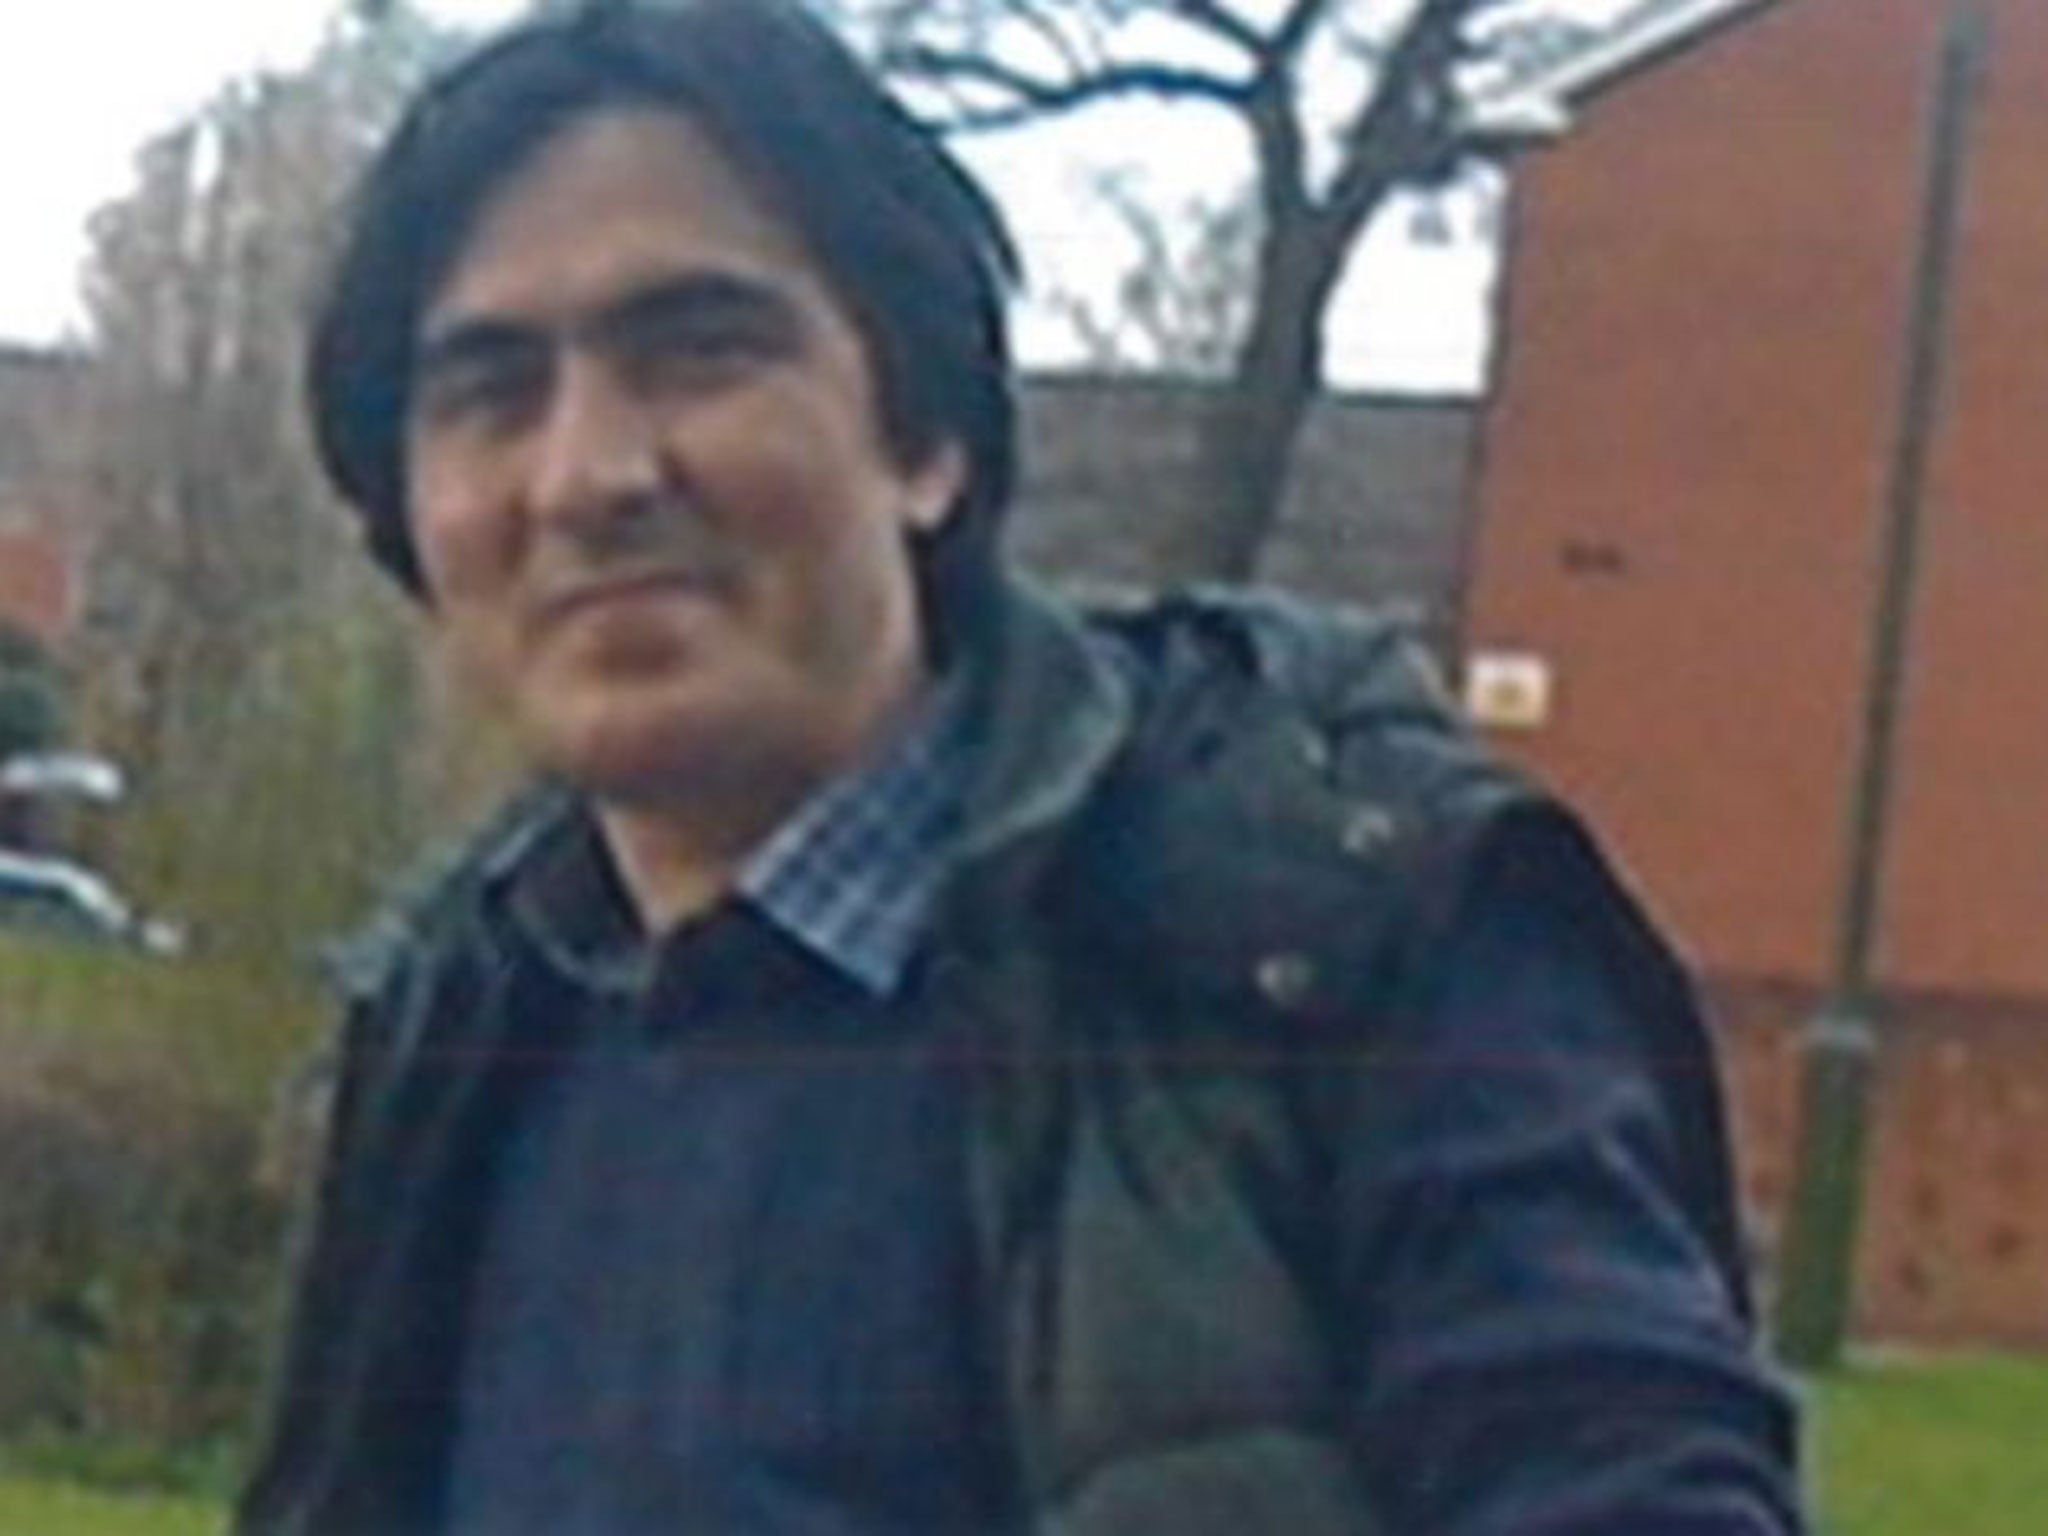 Bijan Ebrahimi, an Iranian man wrongly accused of being a paedophile